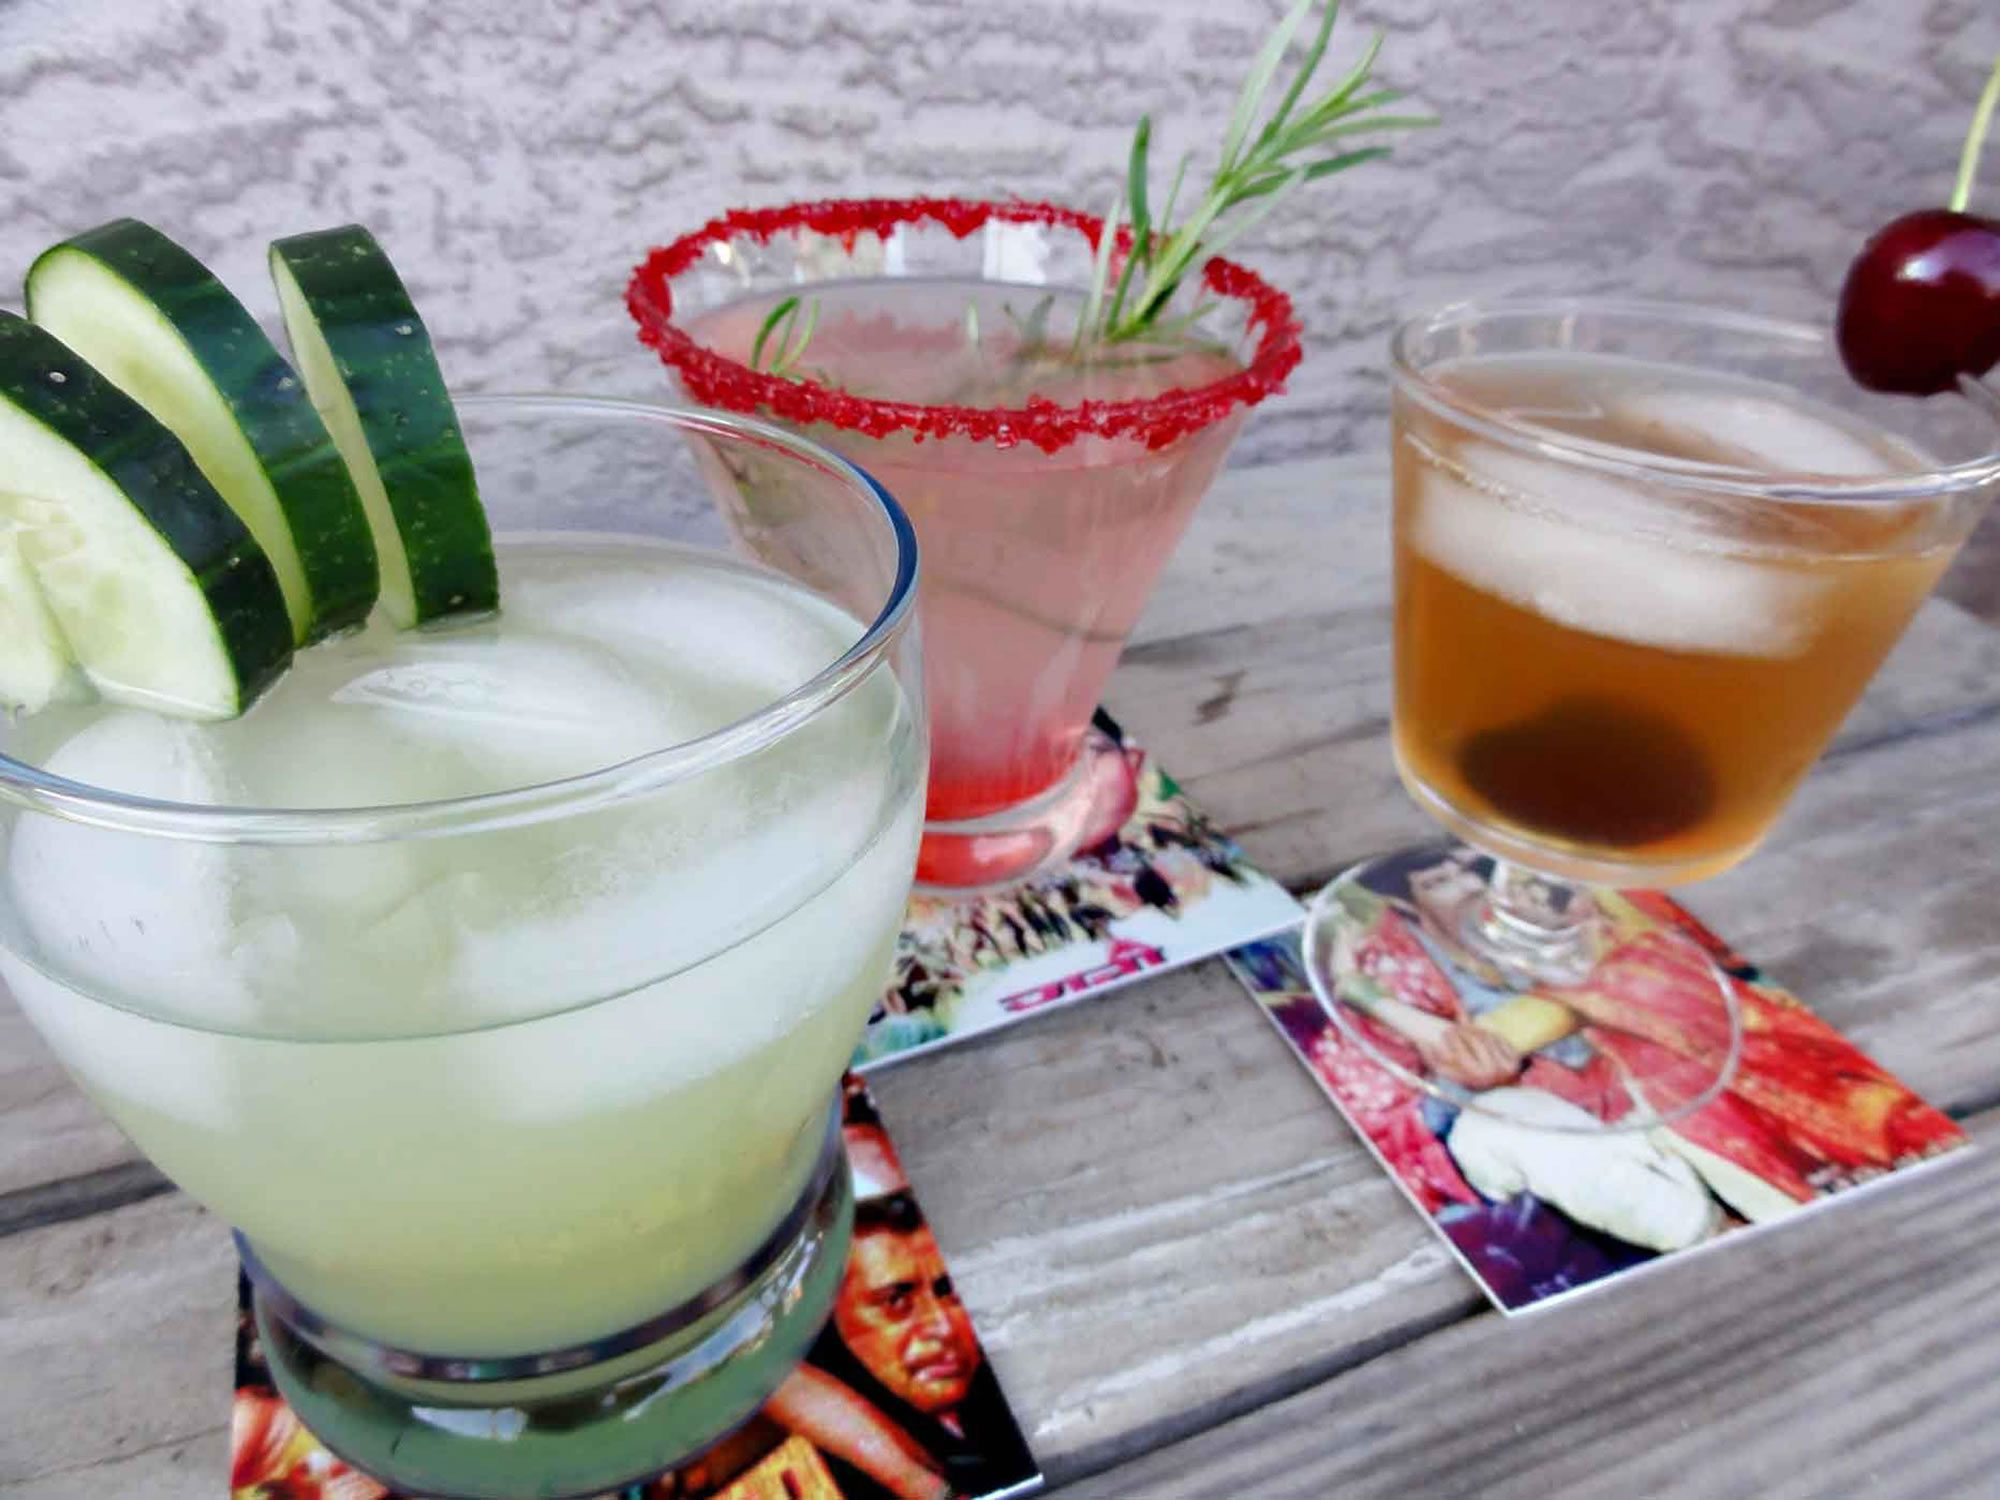 Cool cucumber, pungent rosemary and tart tamarind add refreshing twists to flavored water.